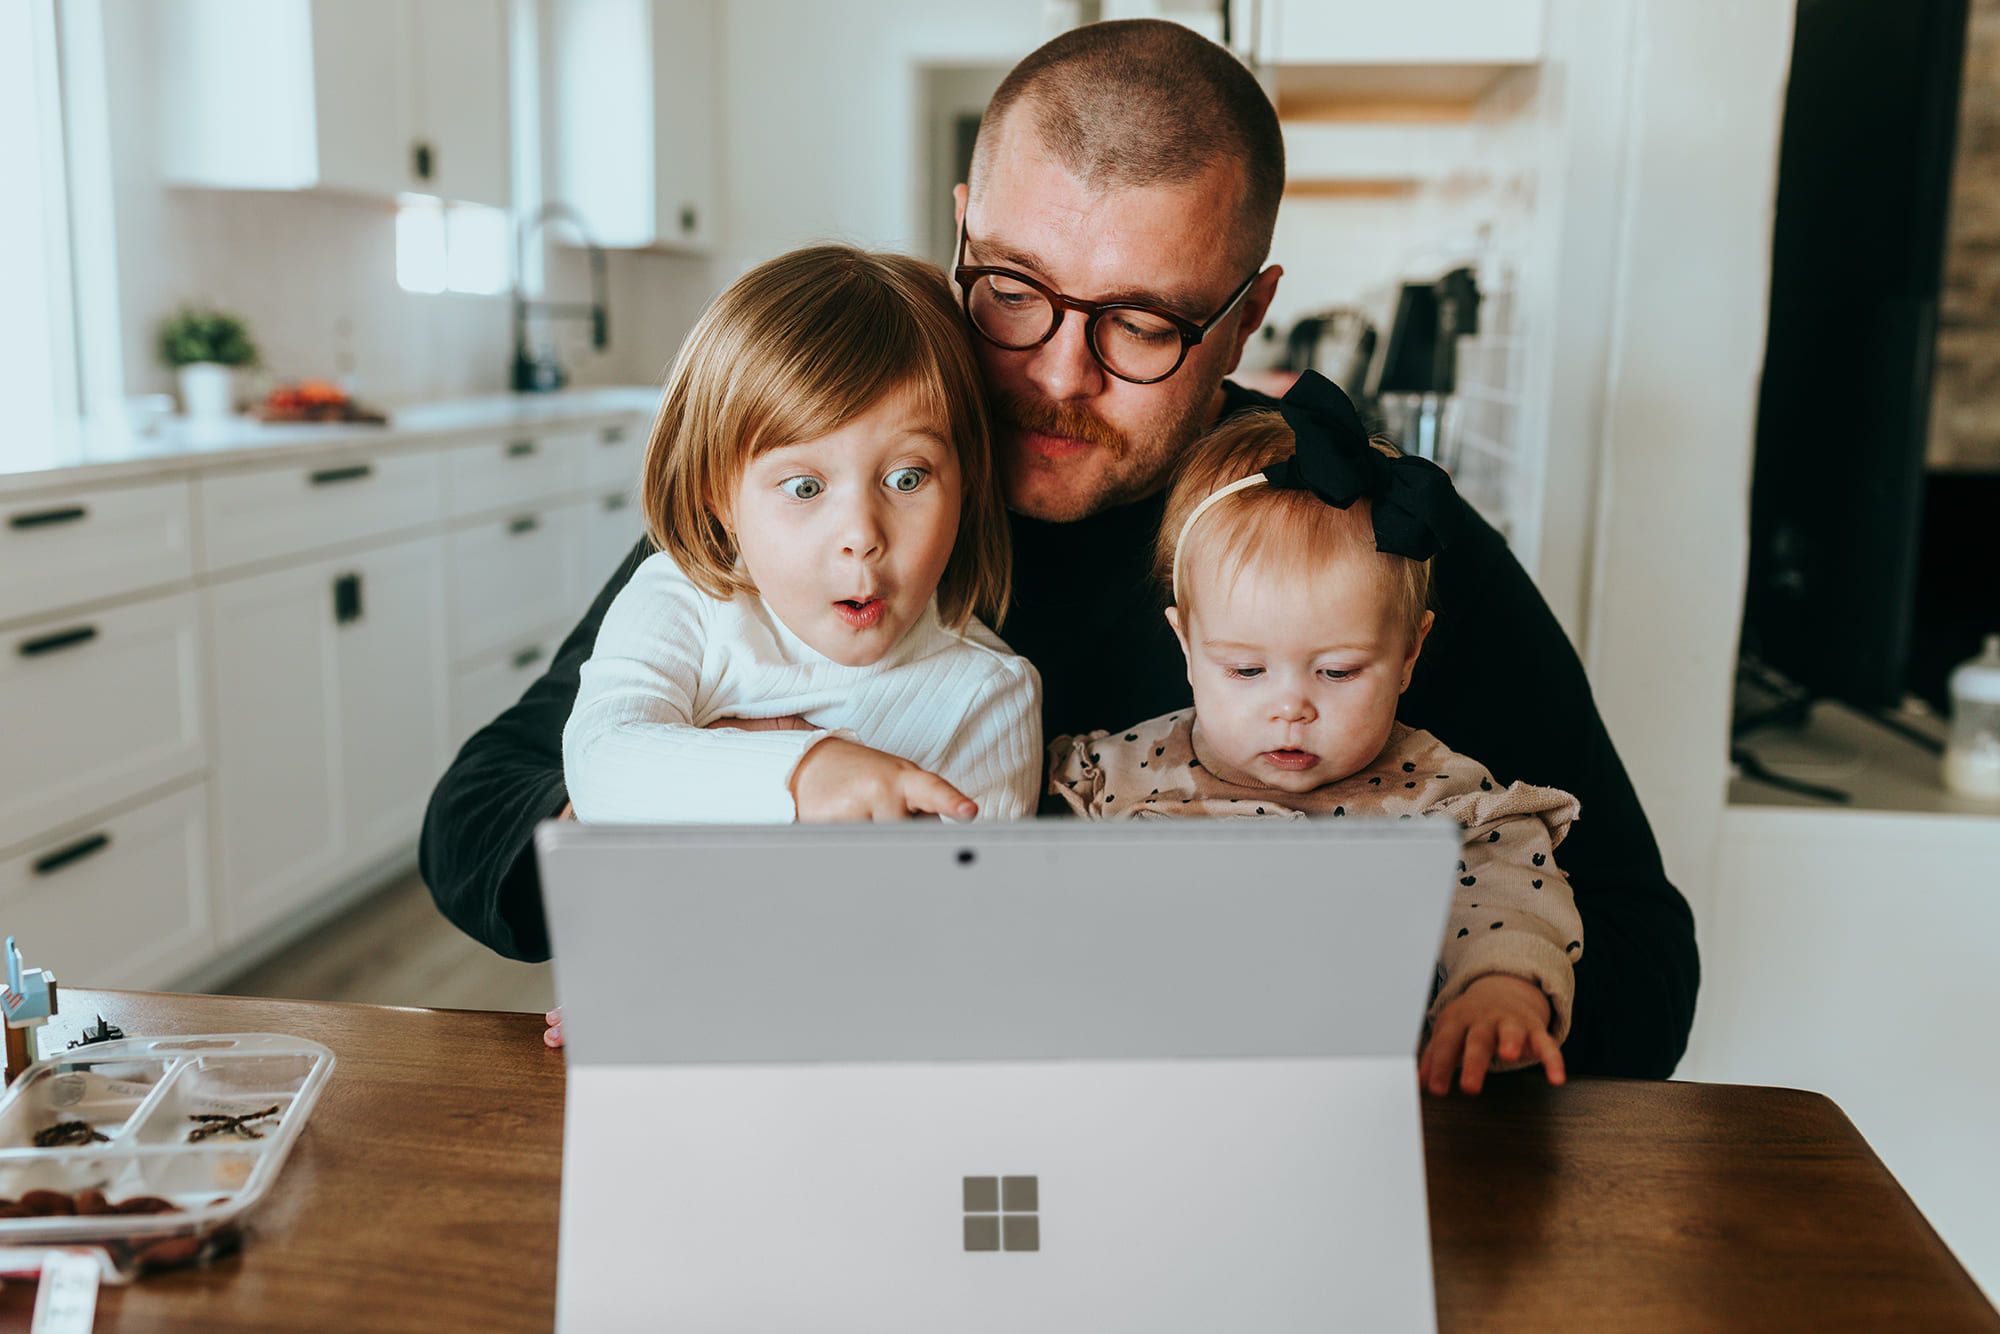 Man holding his young kids in his lap while looking at laptop